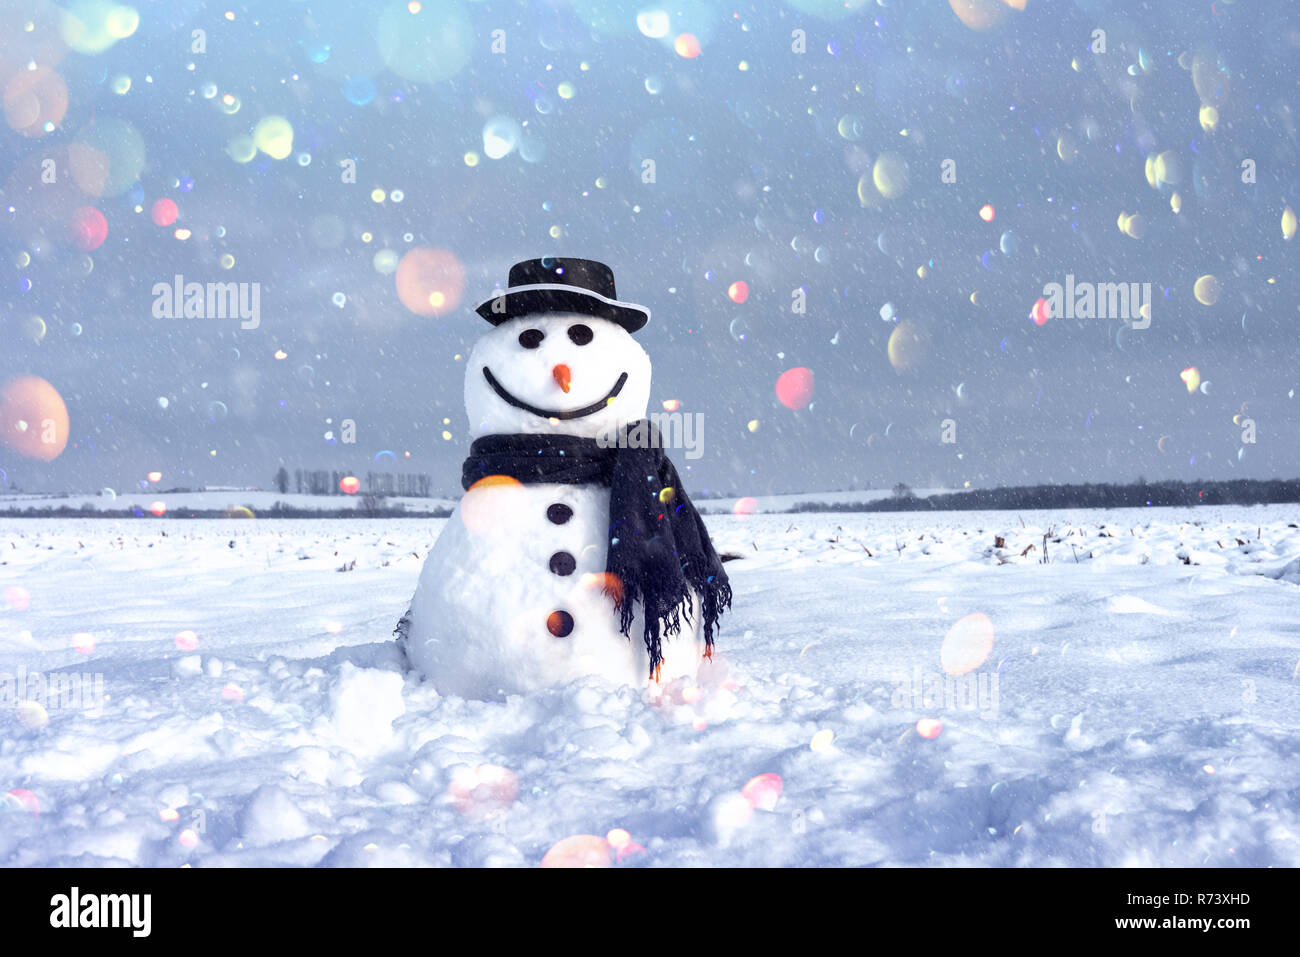 Funny snowman in stylish hat and black scalf on snowy field. DOF bokeh light postprocessing effect. Christmas holiday collage Stock Photo